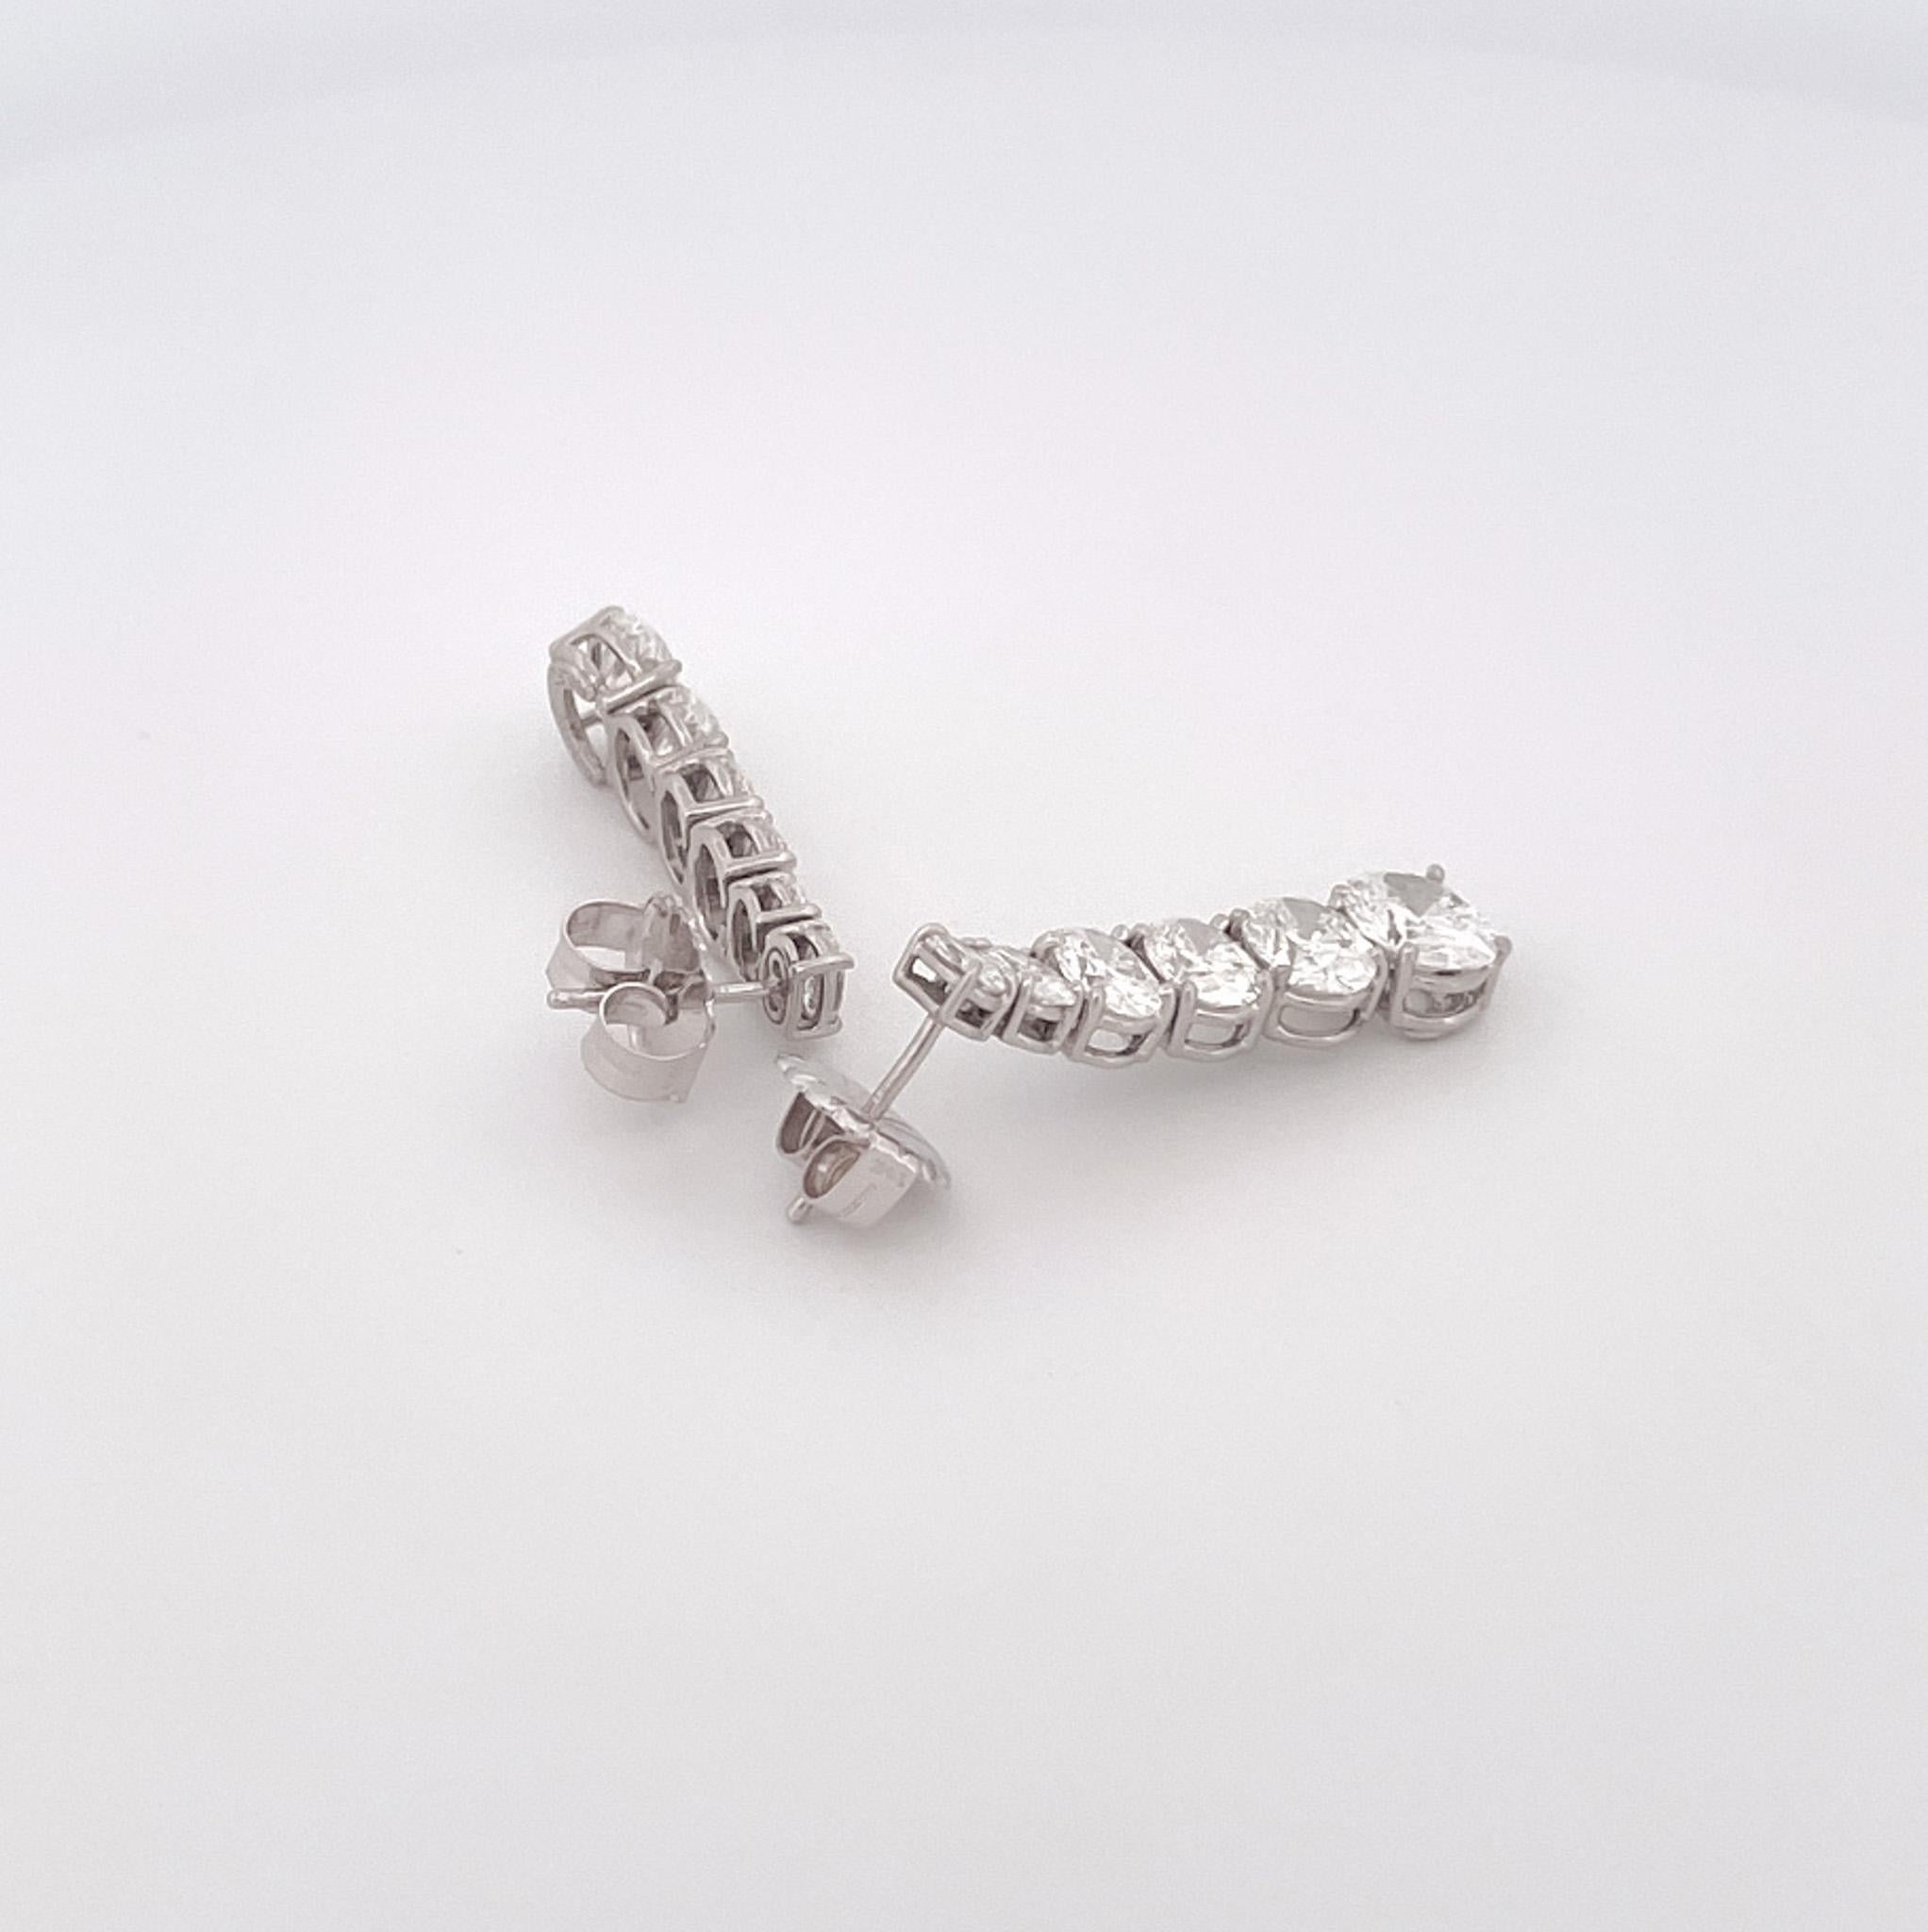 From the Eiseman Estate Jewelry Collection, platinum diamond drop earrings featuring 12 graduated oval diamonds with a combined total weight of 8.15 carats, with E-F color and SI clarity. These earrings are crafted with 1.25 inch drops on each ear